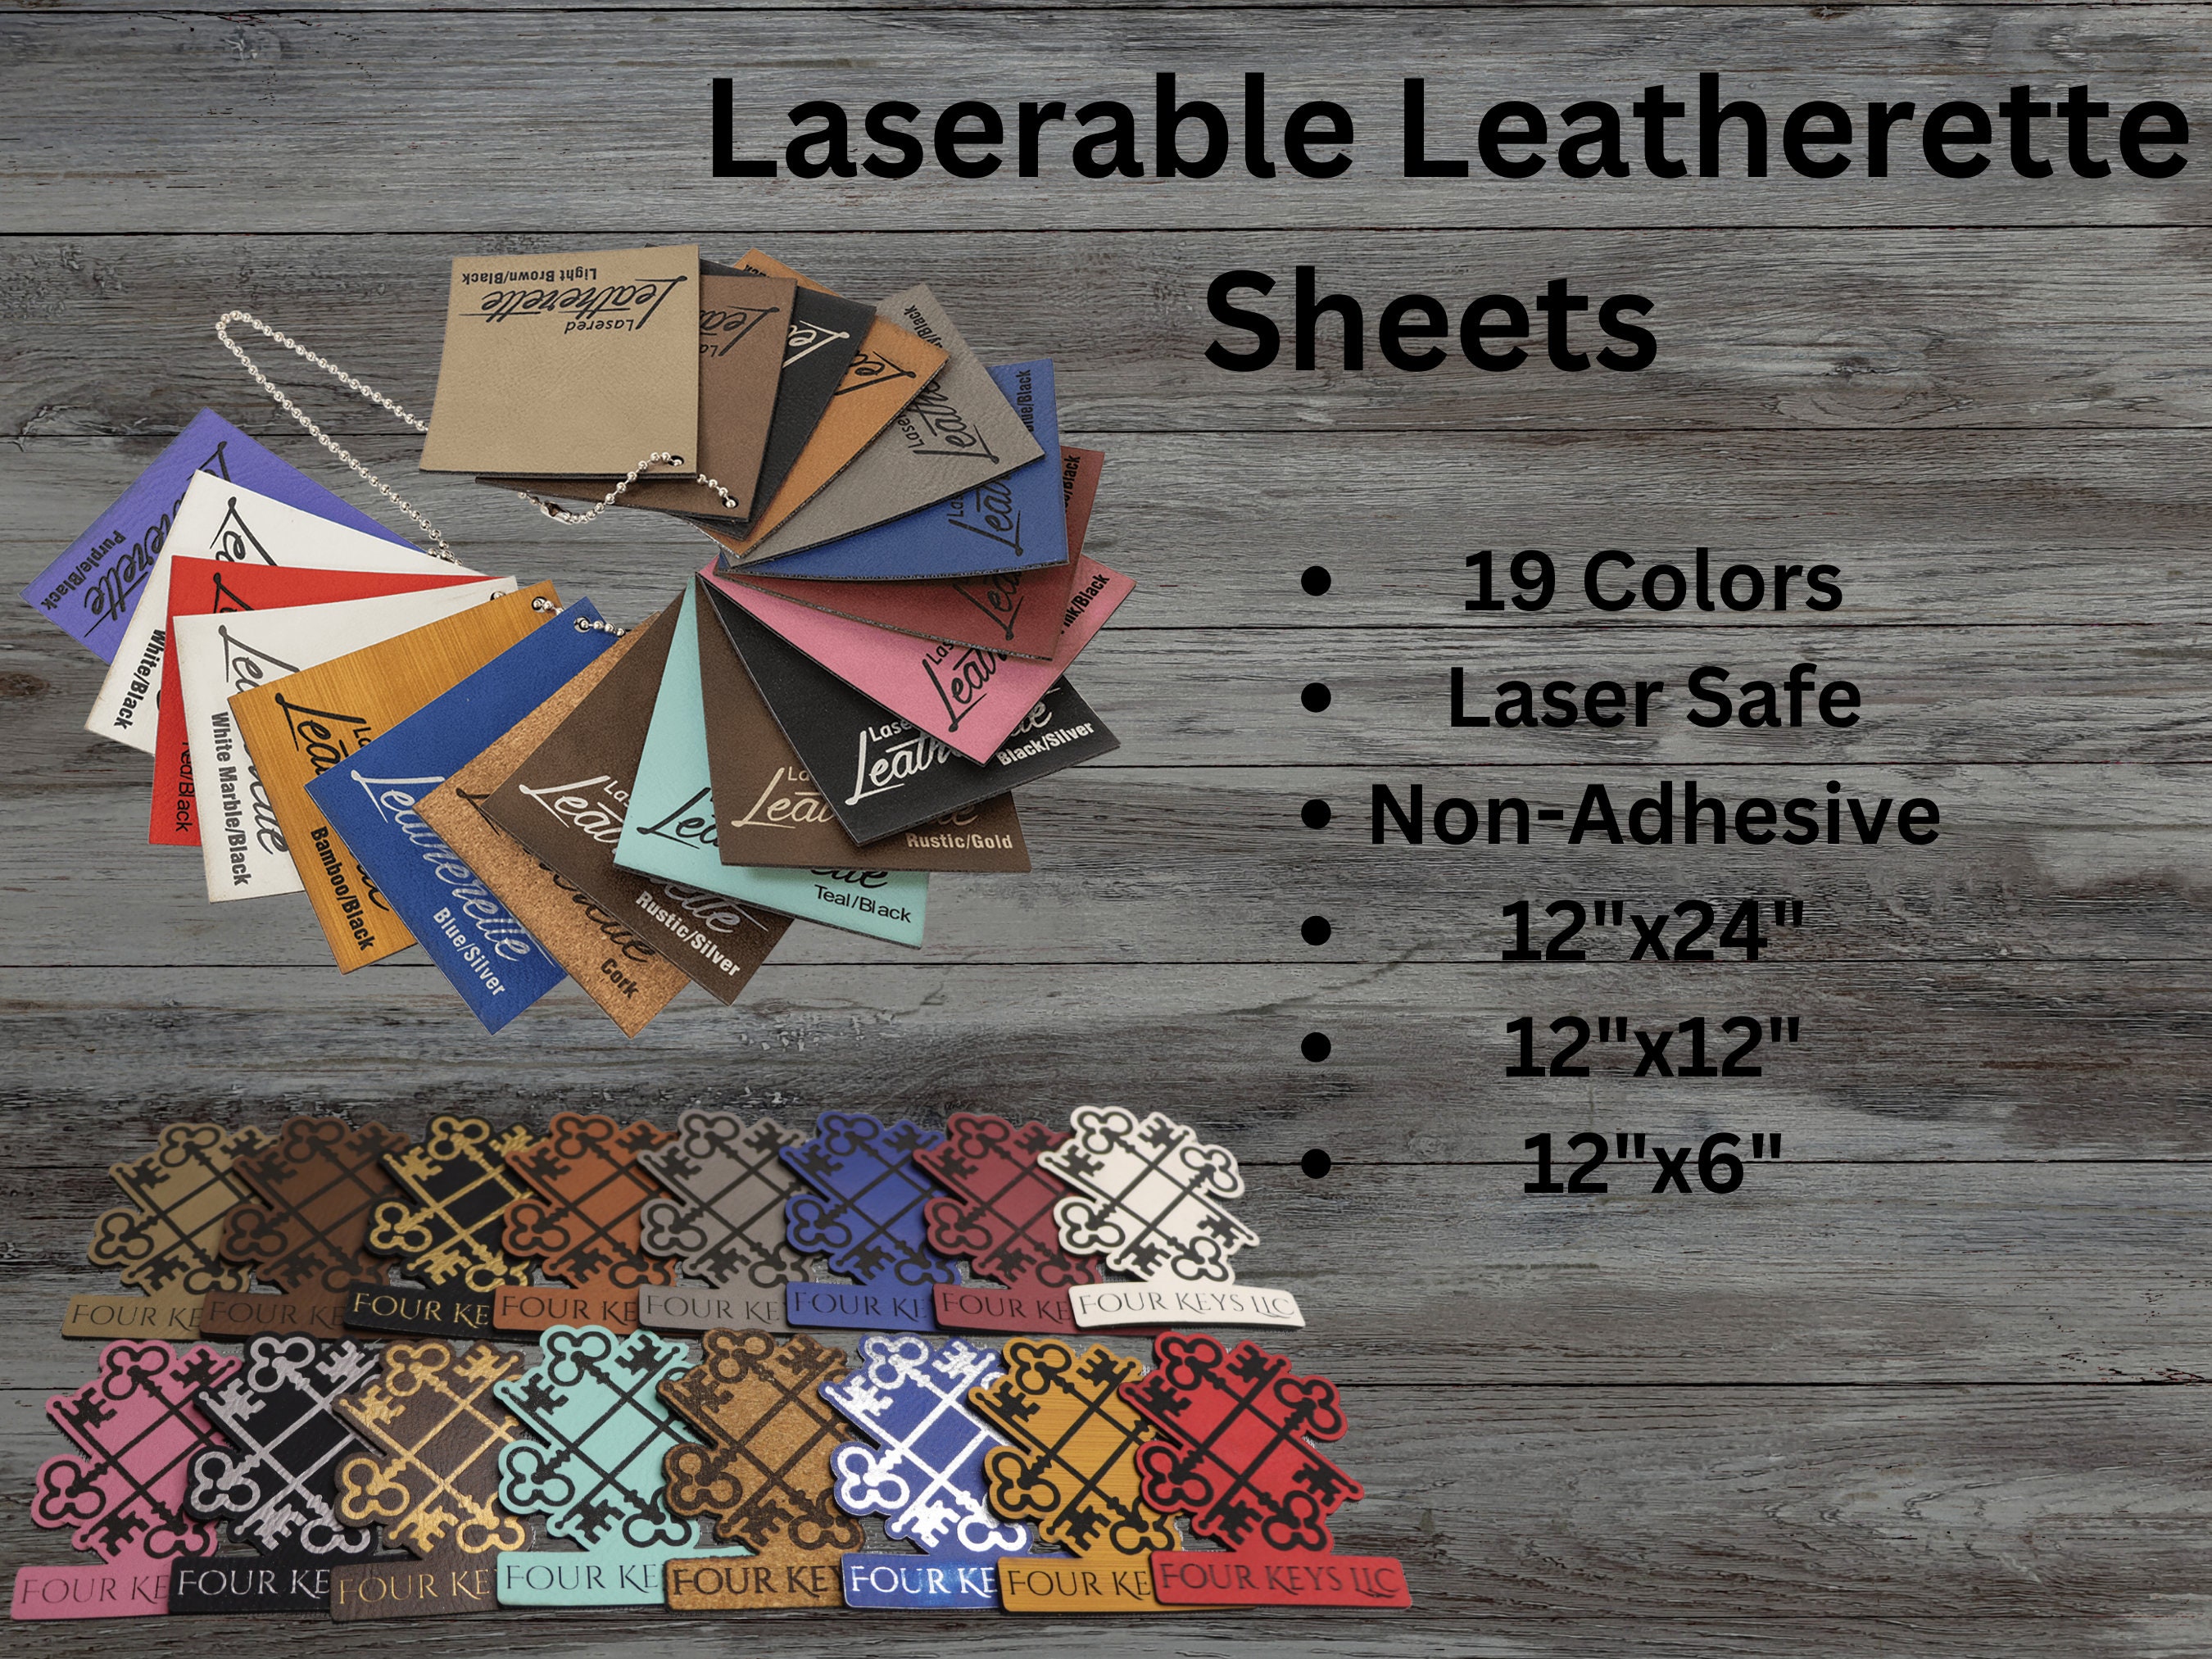 Leatherette Patches Non Adhesive Blank Patches, Laser, UV Print